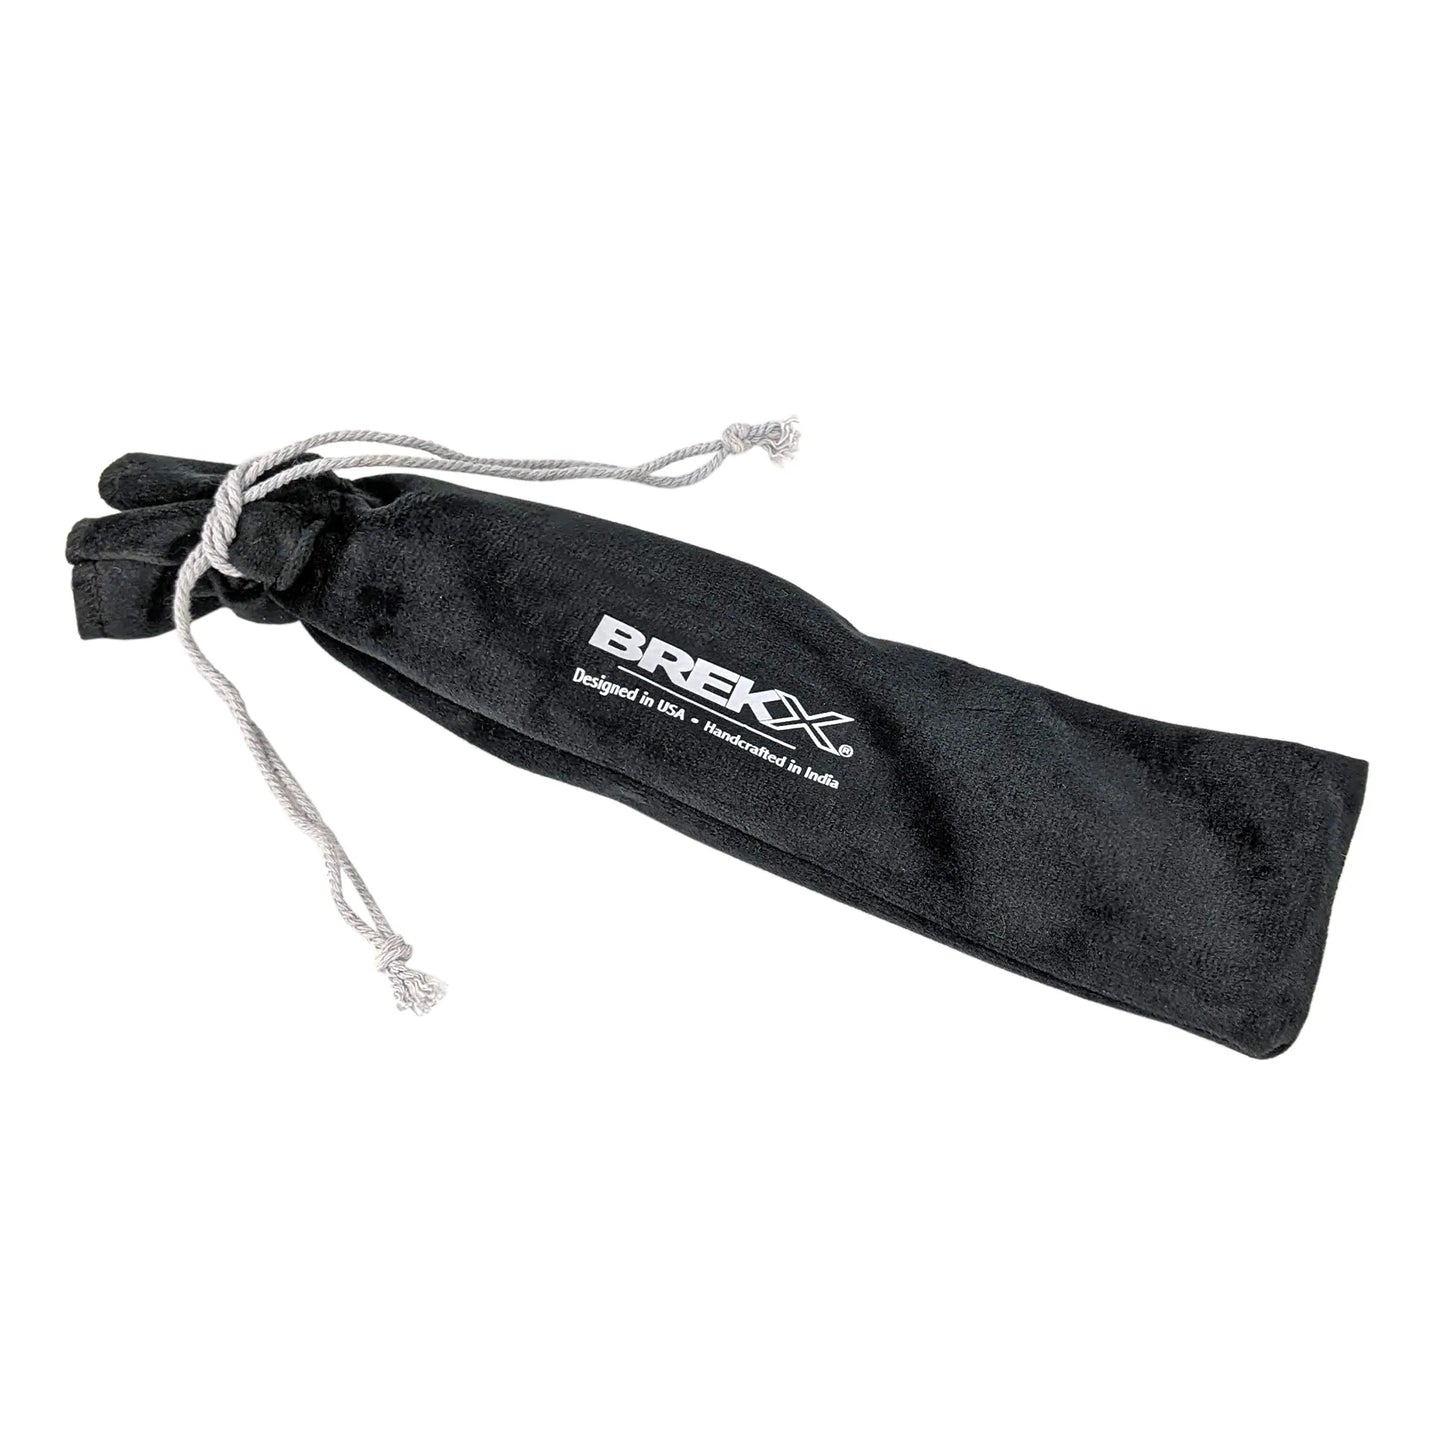 Metal bottle opener with convenient fabric black carrying case to keep it safe and clean when not in use.